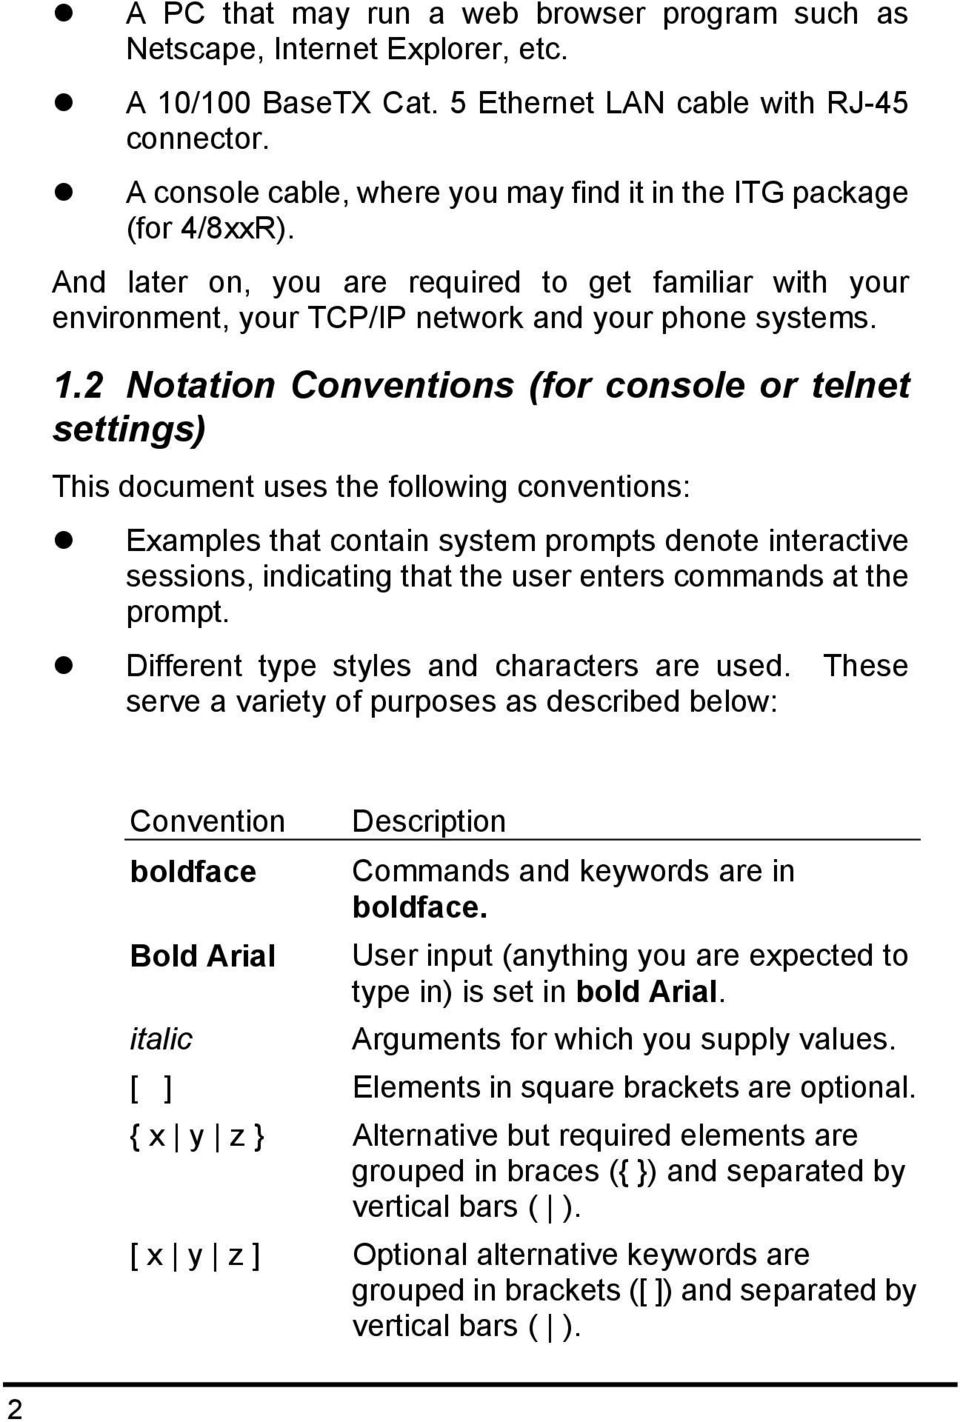 2 Notation Conventions (for console or telnet settings) This document uses the following conventions: Examples that contain system prompts denote interactive sessions, indicating that the user enters